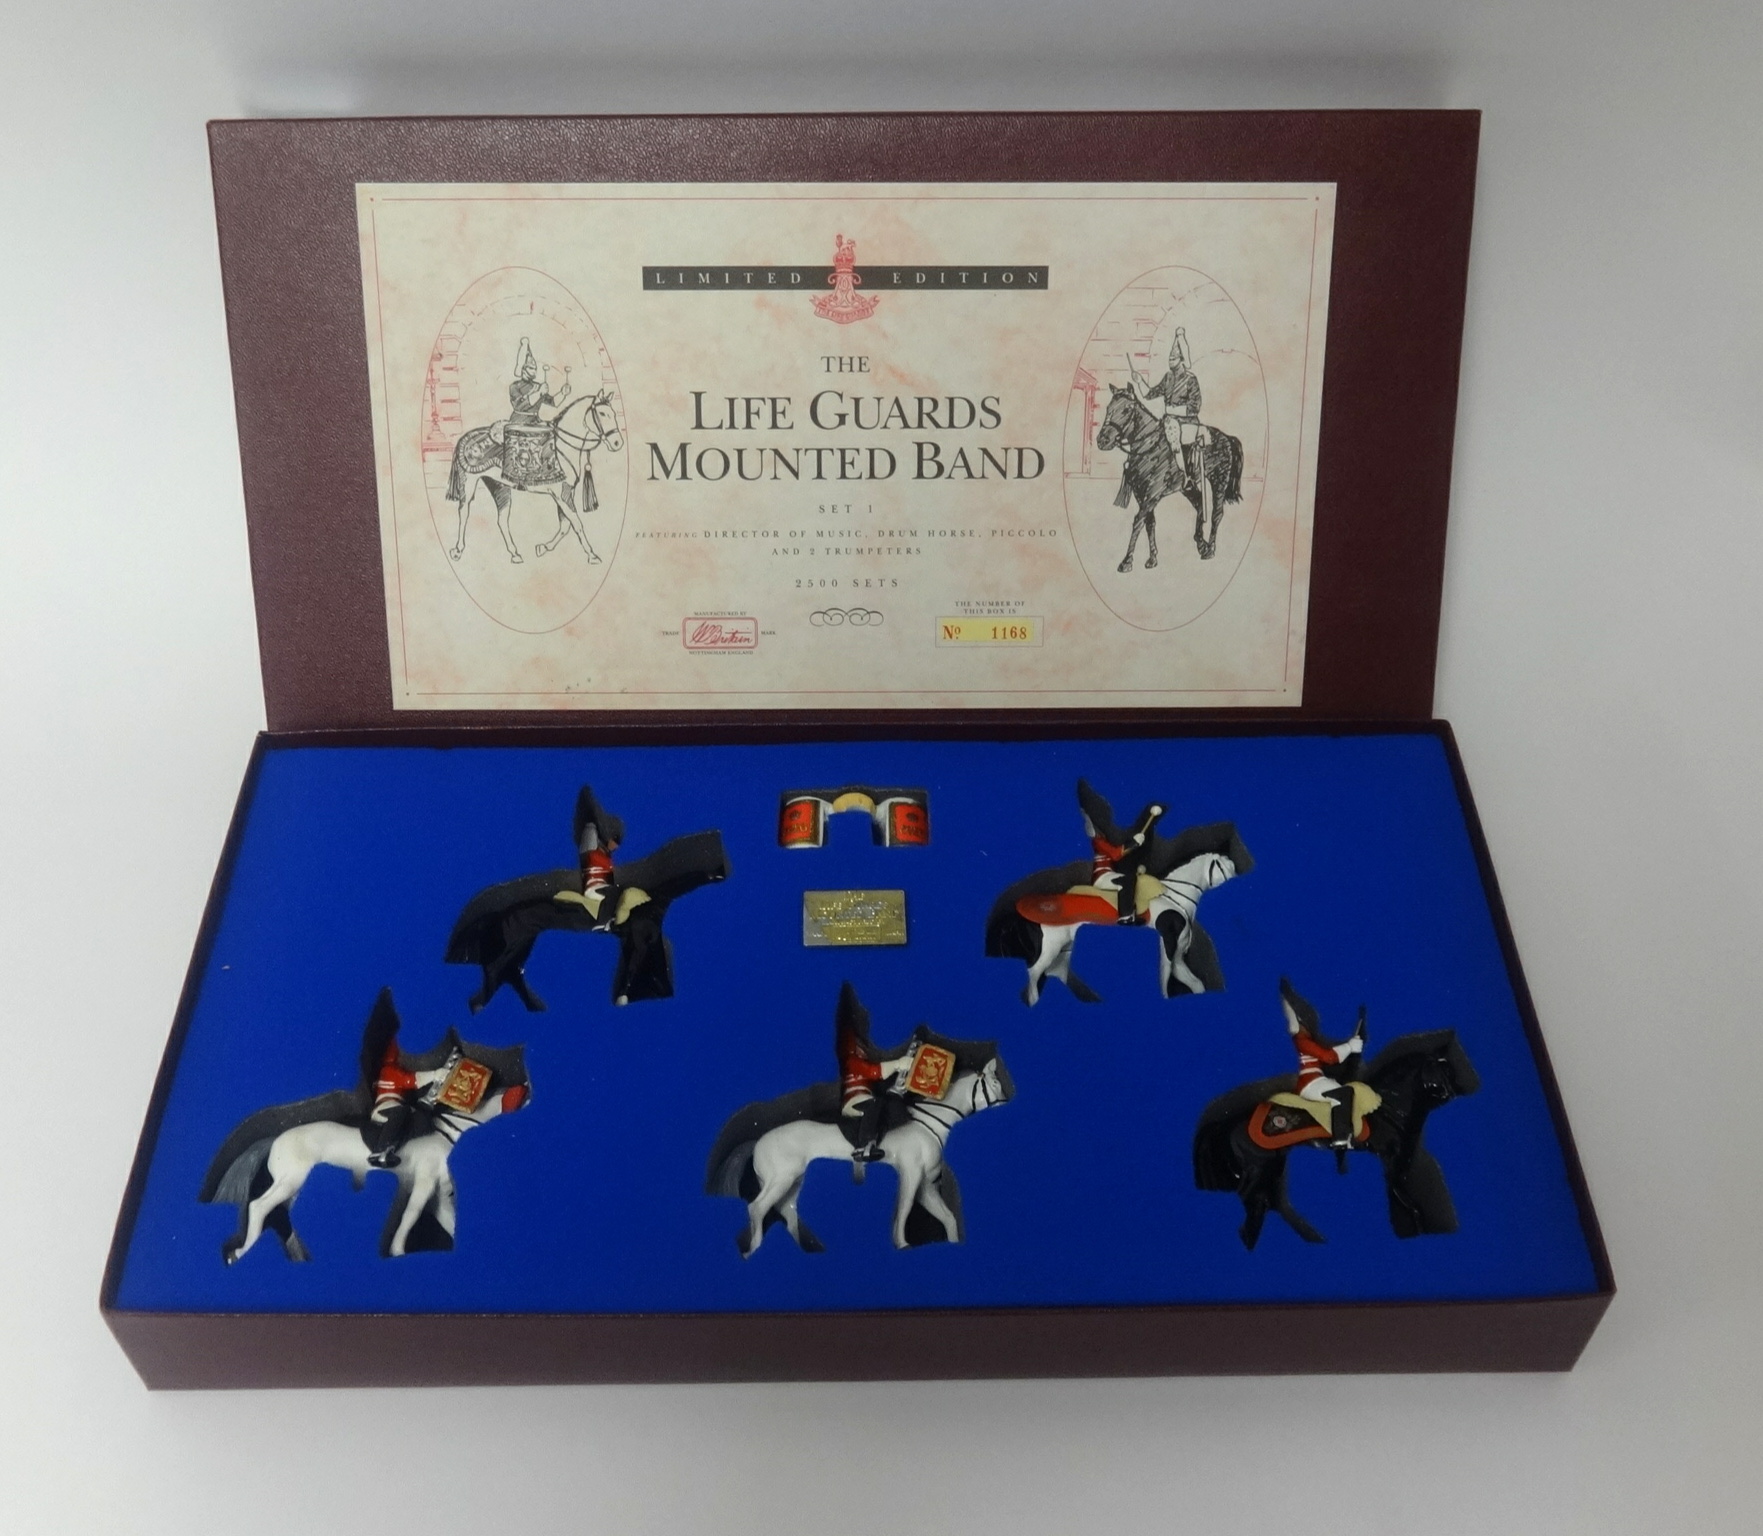 Britains, Britains Soldiers, No.5195 limited edition The Life Guards Mounted Band Set One No1168/